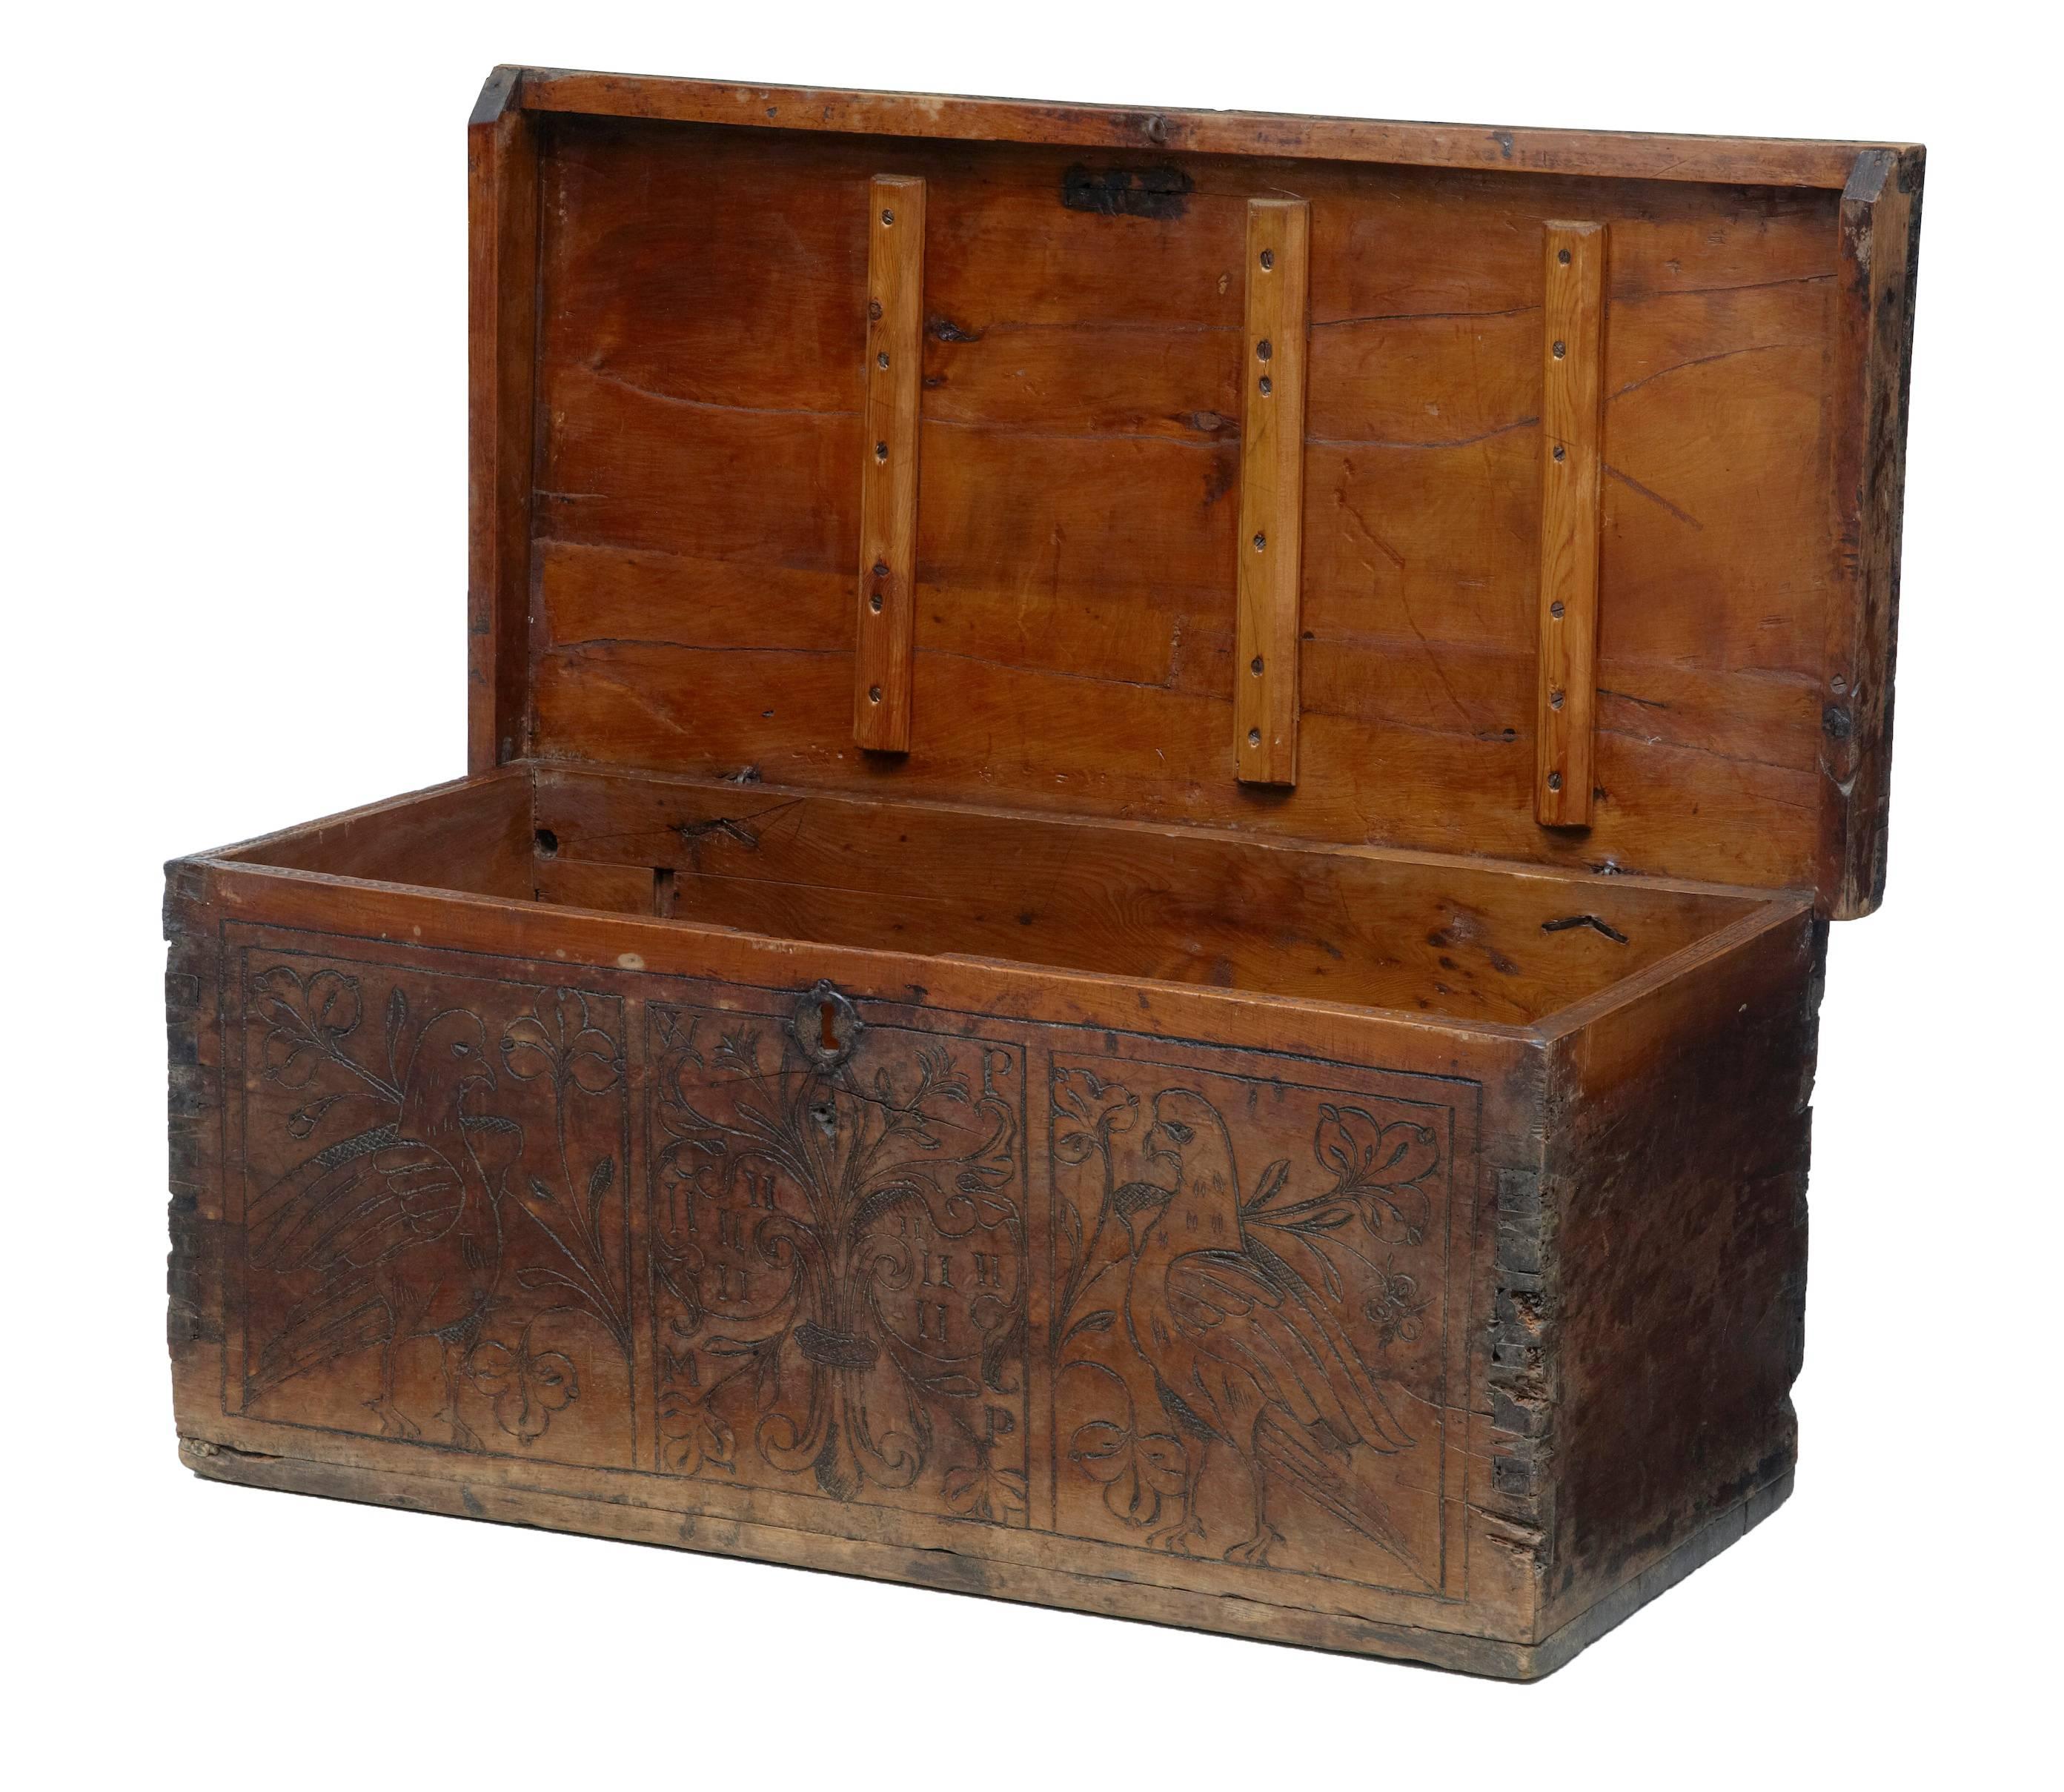 Small walnut marriage chest, circa 1700.
Poker work on the front with initials in a fleur de lys design, flanked either side by doves.
No lock present.
Top with extensive restorations, hard wax to age splits to top and later woodwork supports on